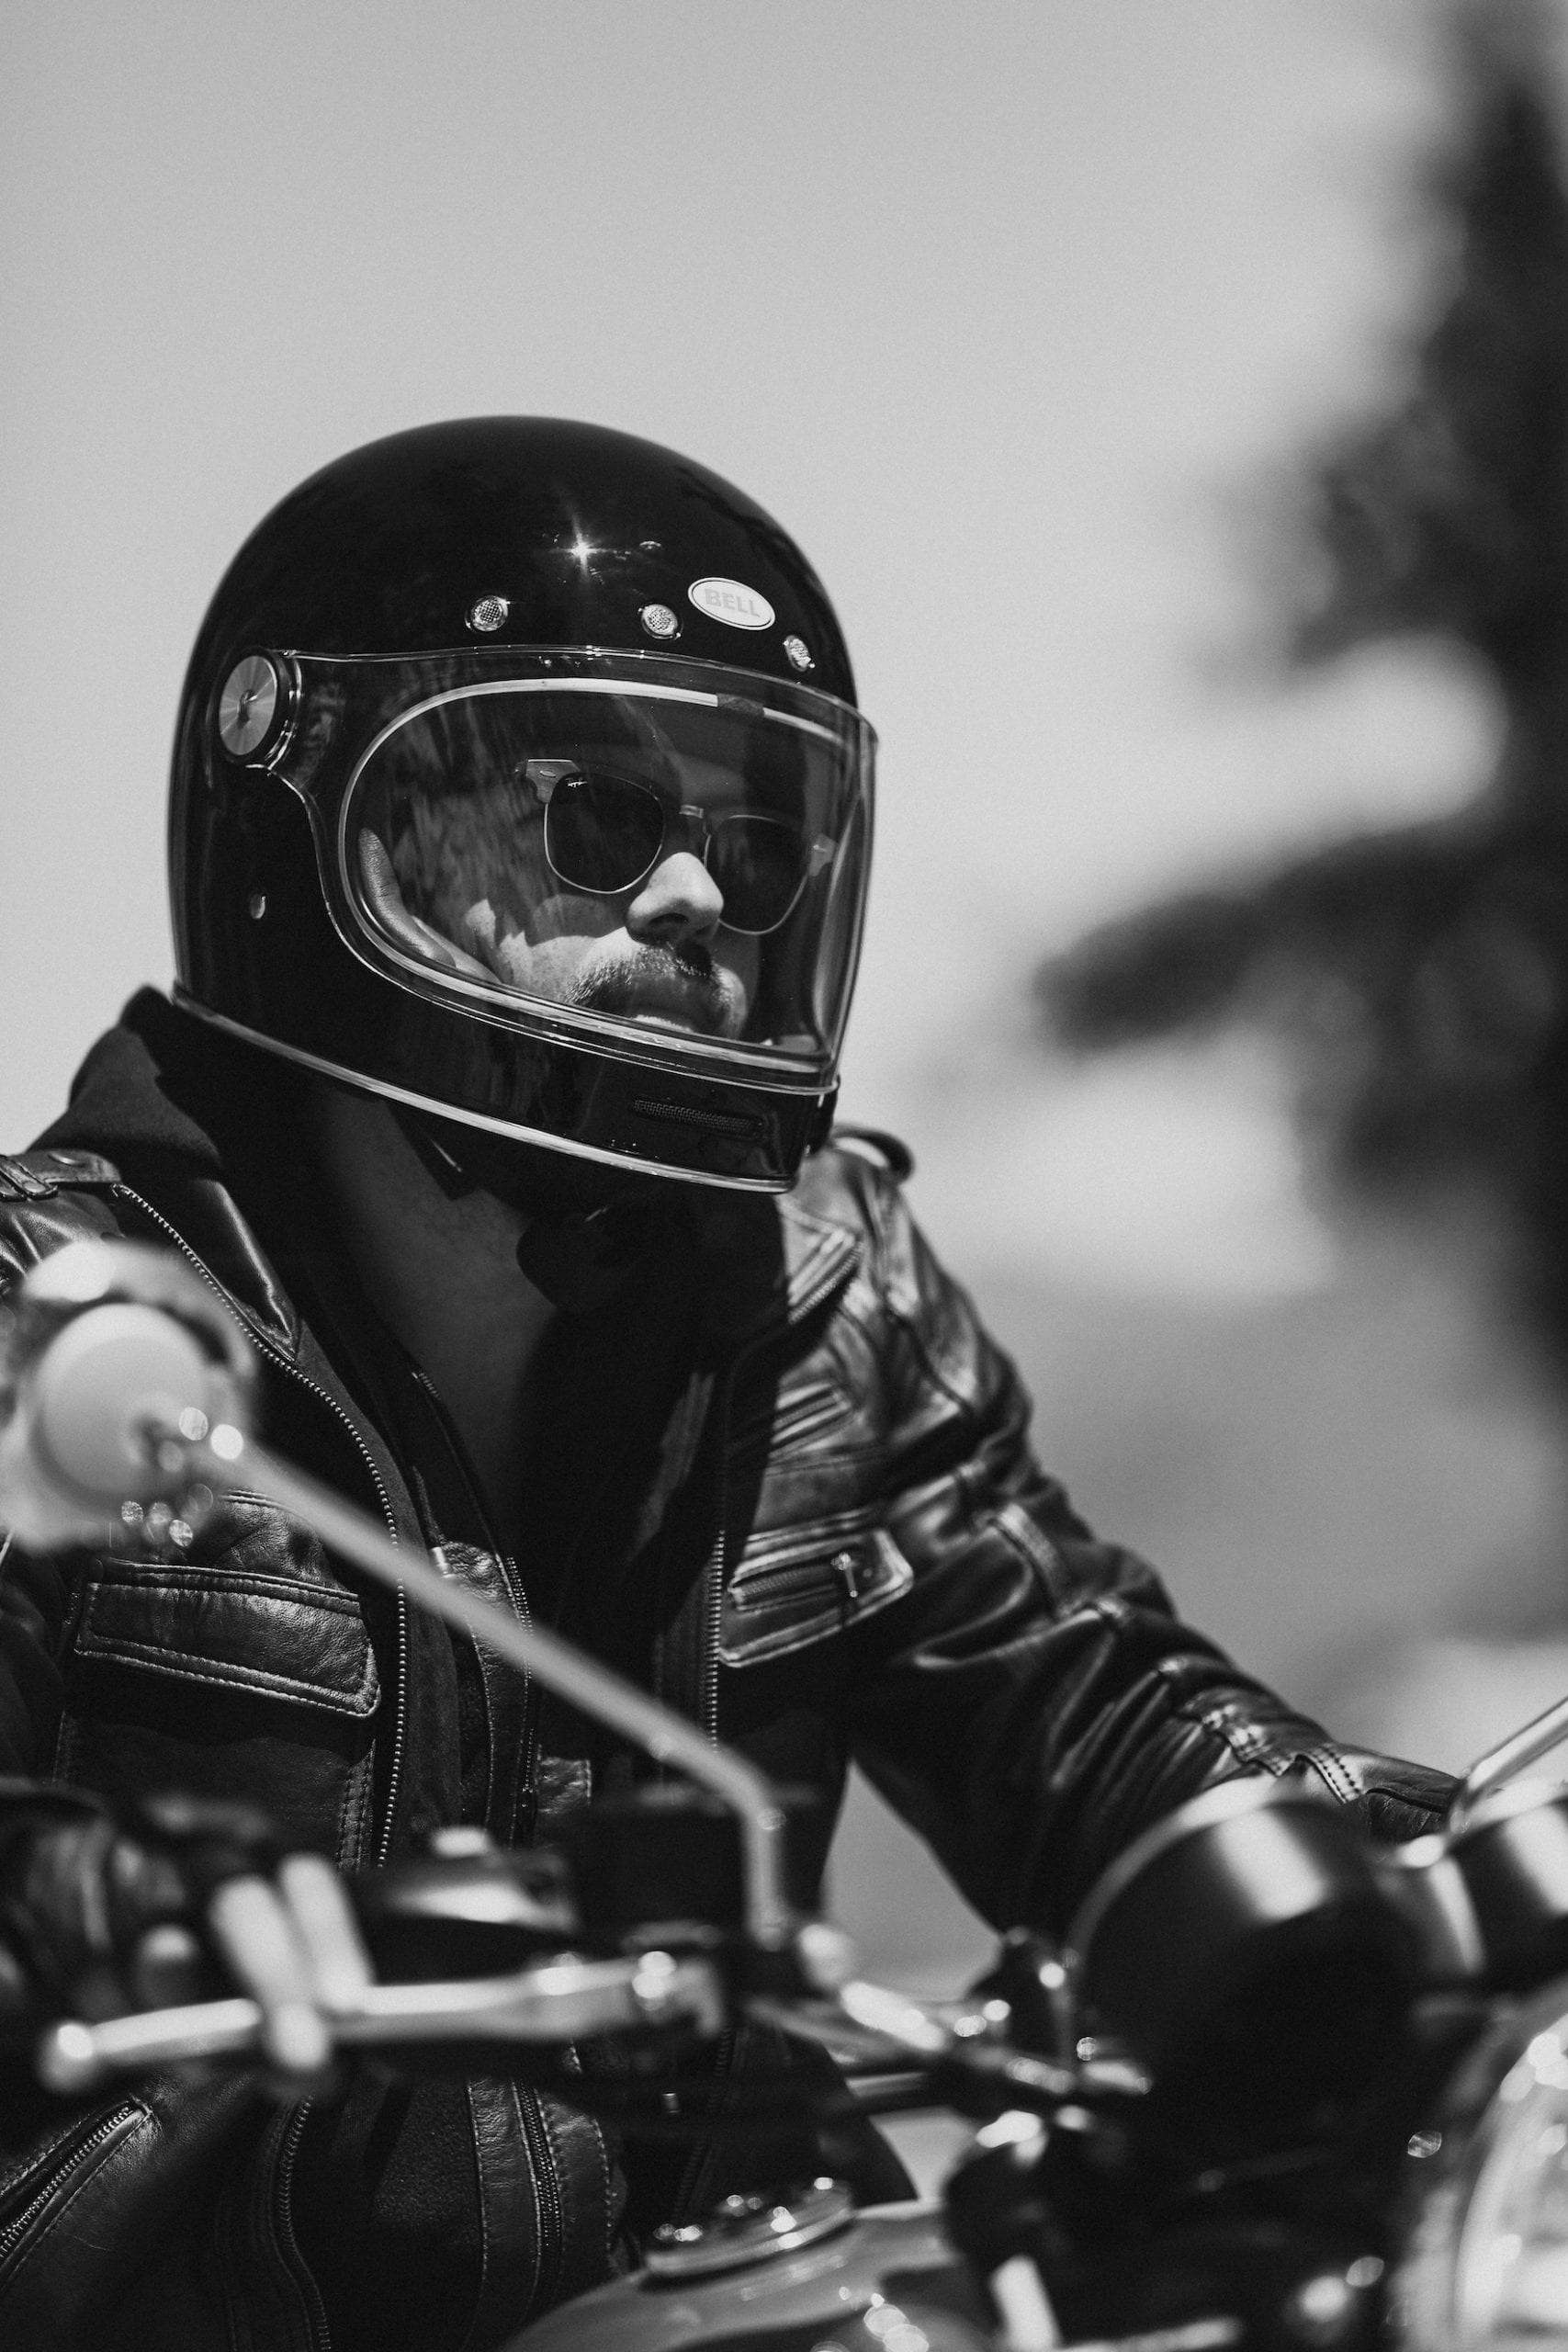 Black and white closeup of the motorcycle rider on his motorcycle